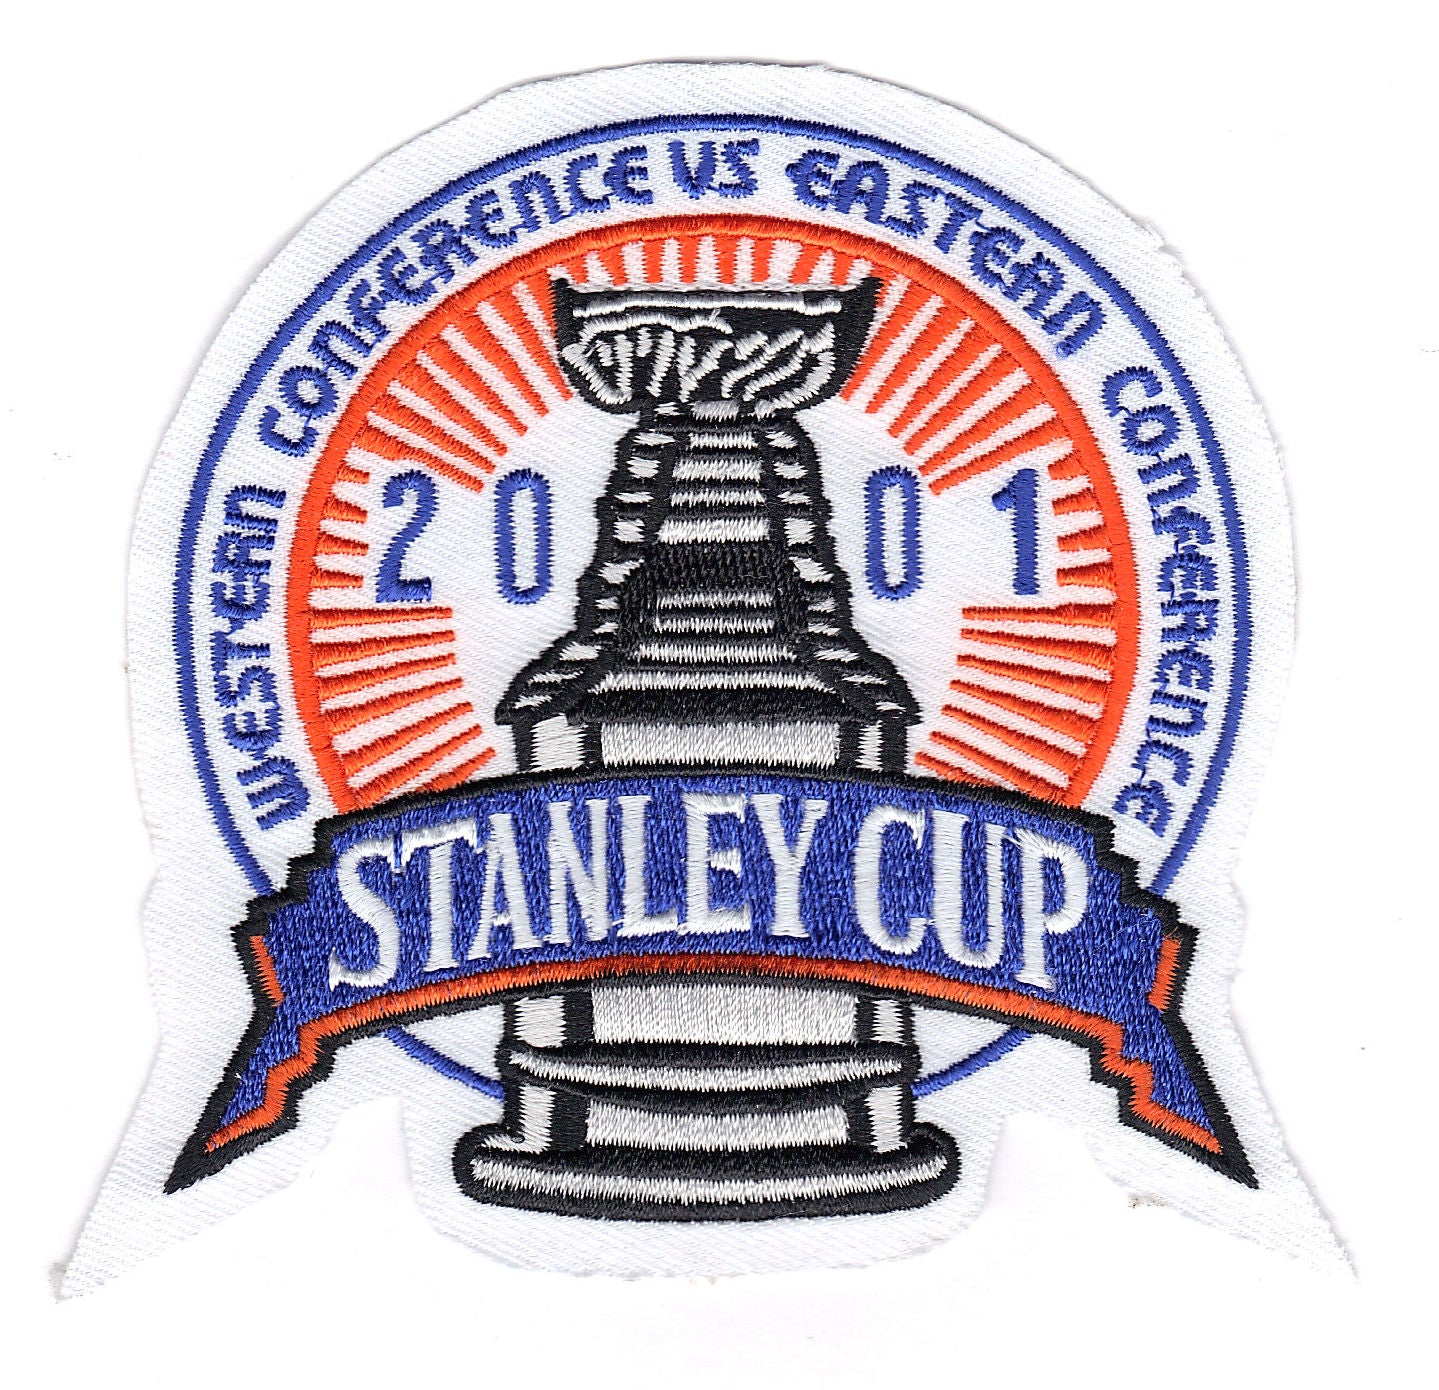 1995 New Jersey Devils NHL Stanley Cup Final Champions Patch – Patch  Collection